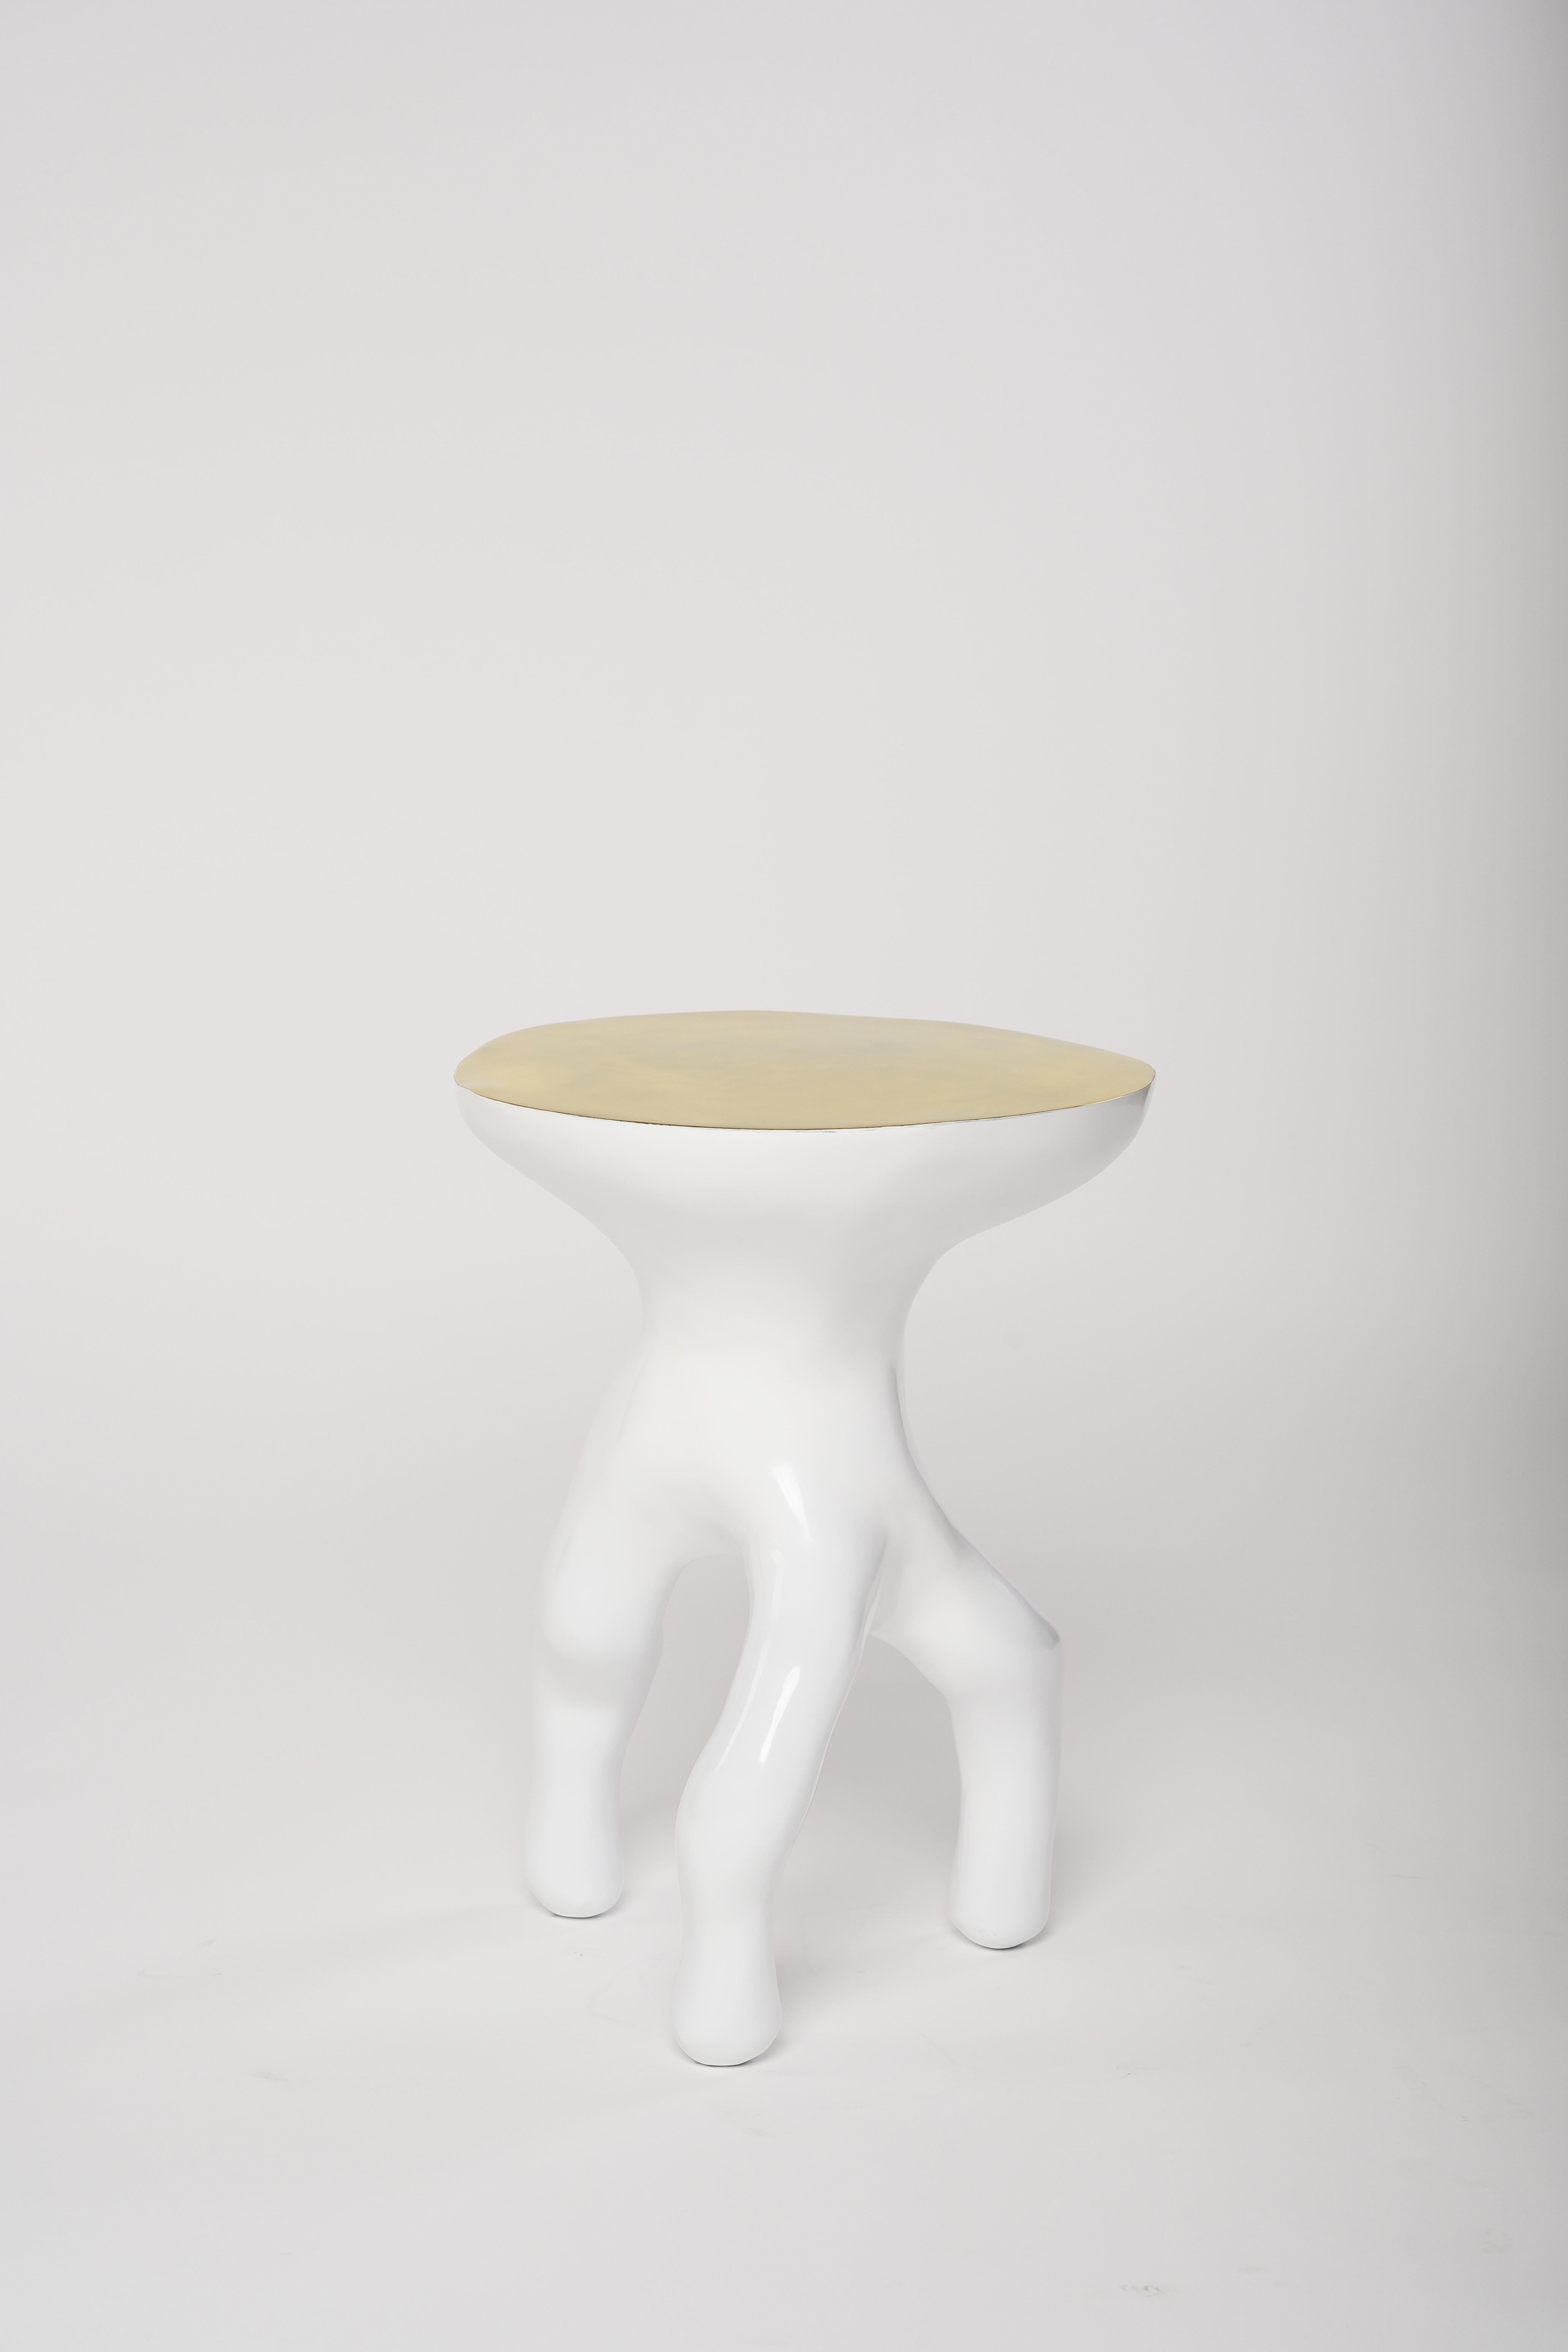 Made to order Luca Stool / Side Table by Elan Atelier. Living and on the move. Polished white bronze with exposed top, that does double duty as either a stool or side table.

Cast bronze base (lost wax technique) with a white gloss lacquer coating